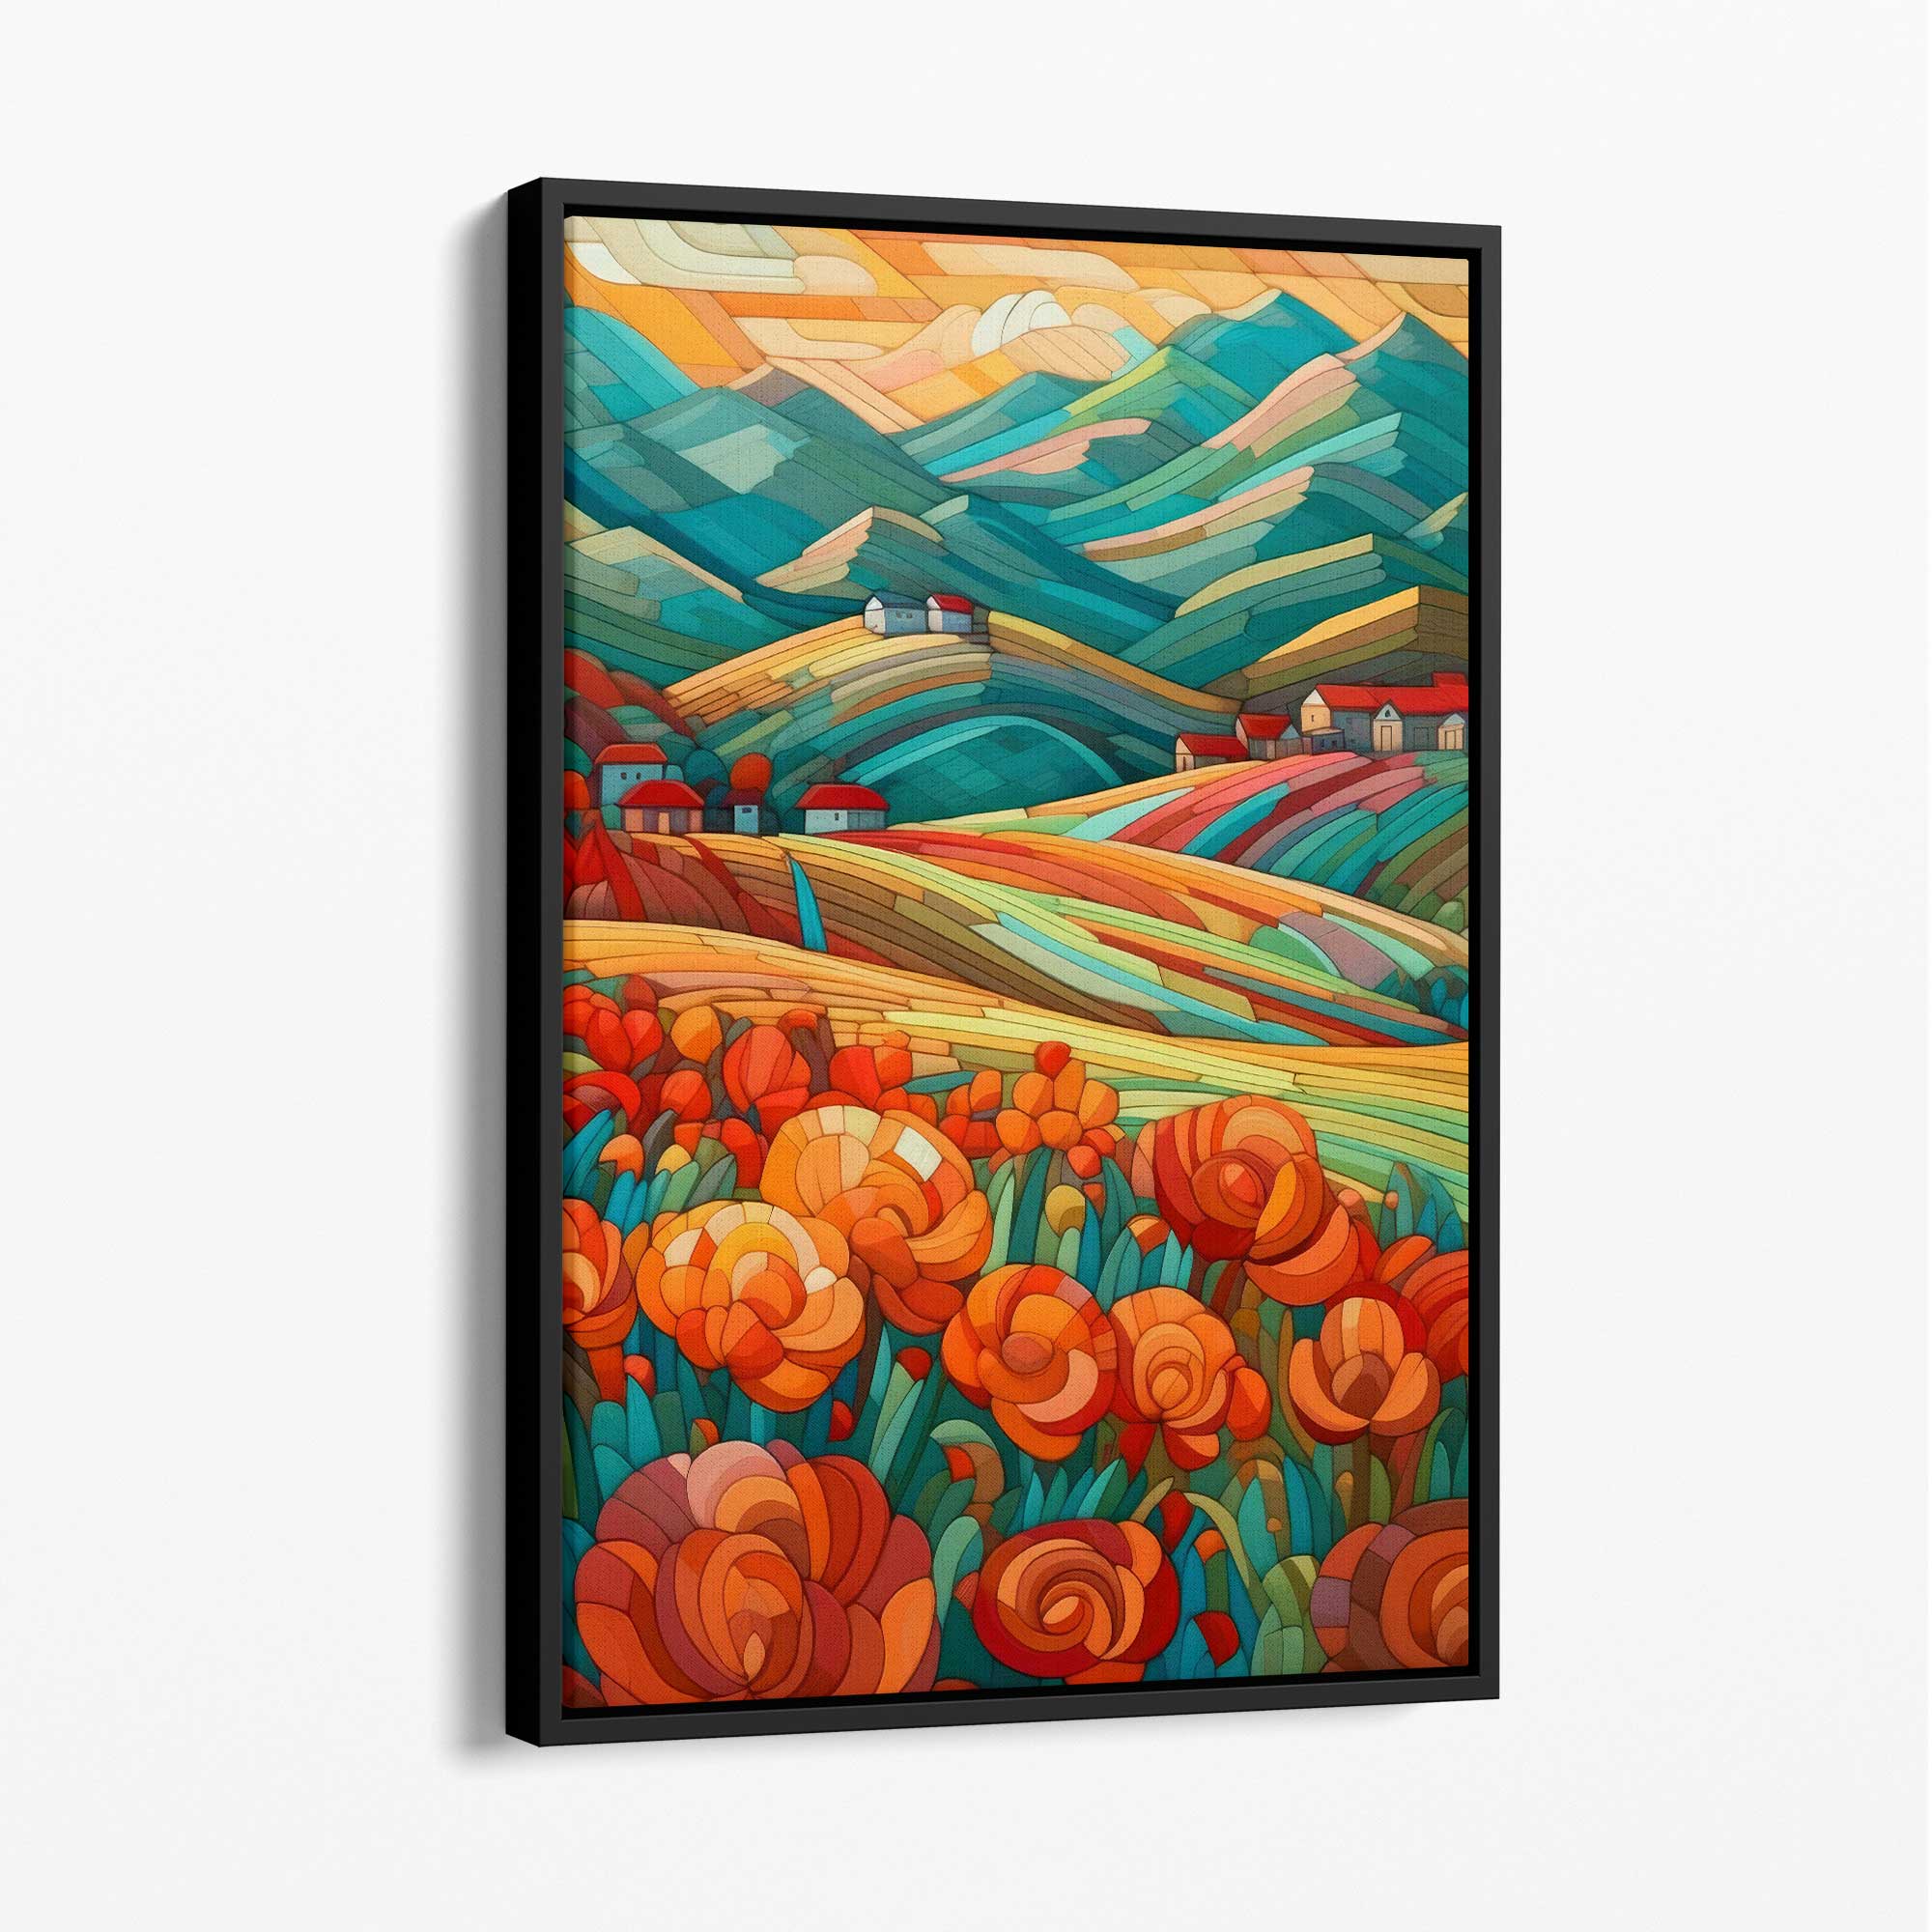 Colourful Landscape with Red Flowers Abstract Painting Canvas Print with Black Float Frame | Artze Wall Art UK